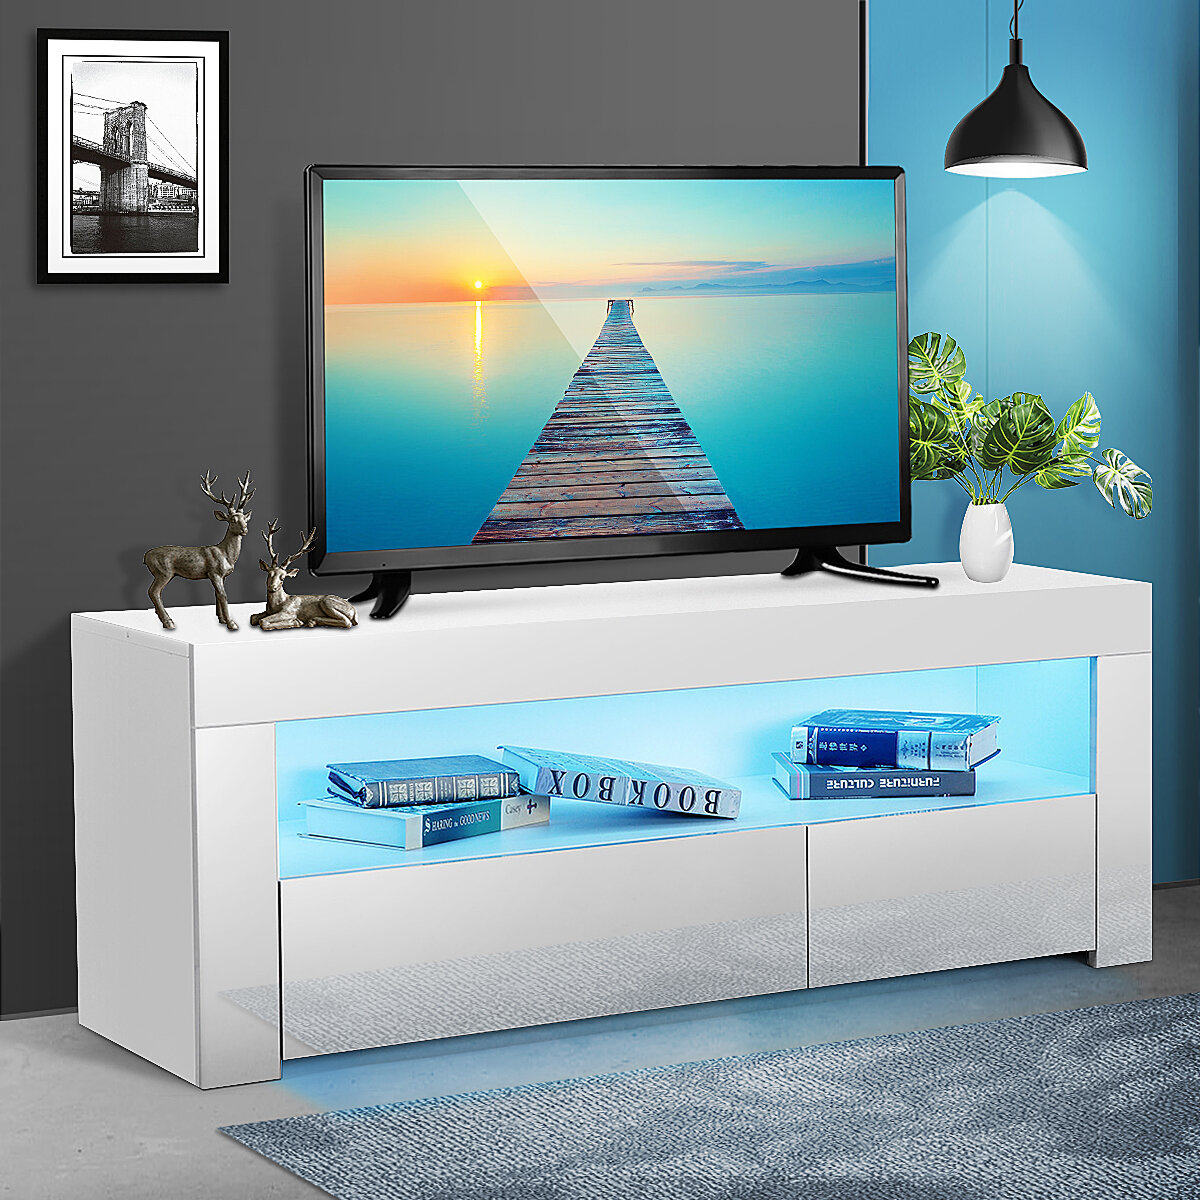 Image of Woodyhome 47" High Gloss TV Stand with LED Lights High Storage Space TV Console HolderEasy to Install for Home Bedroom